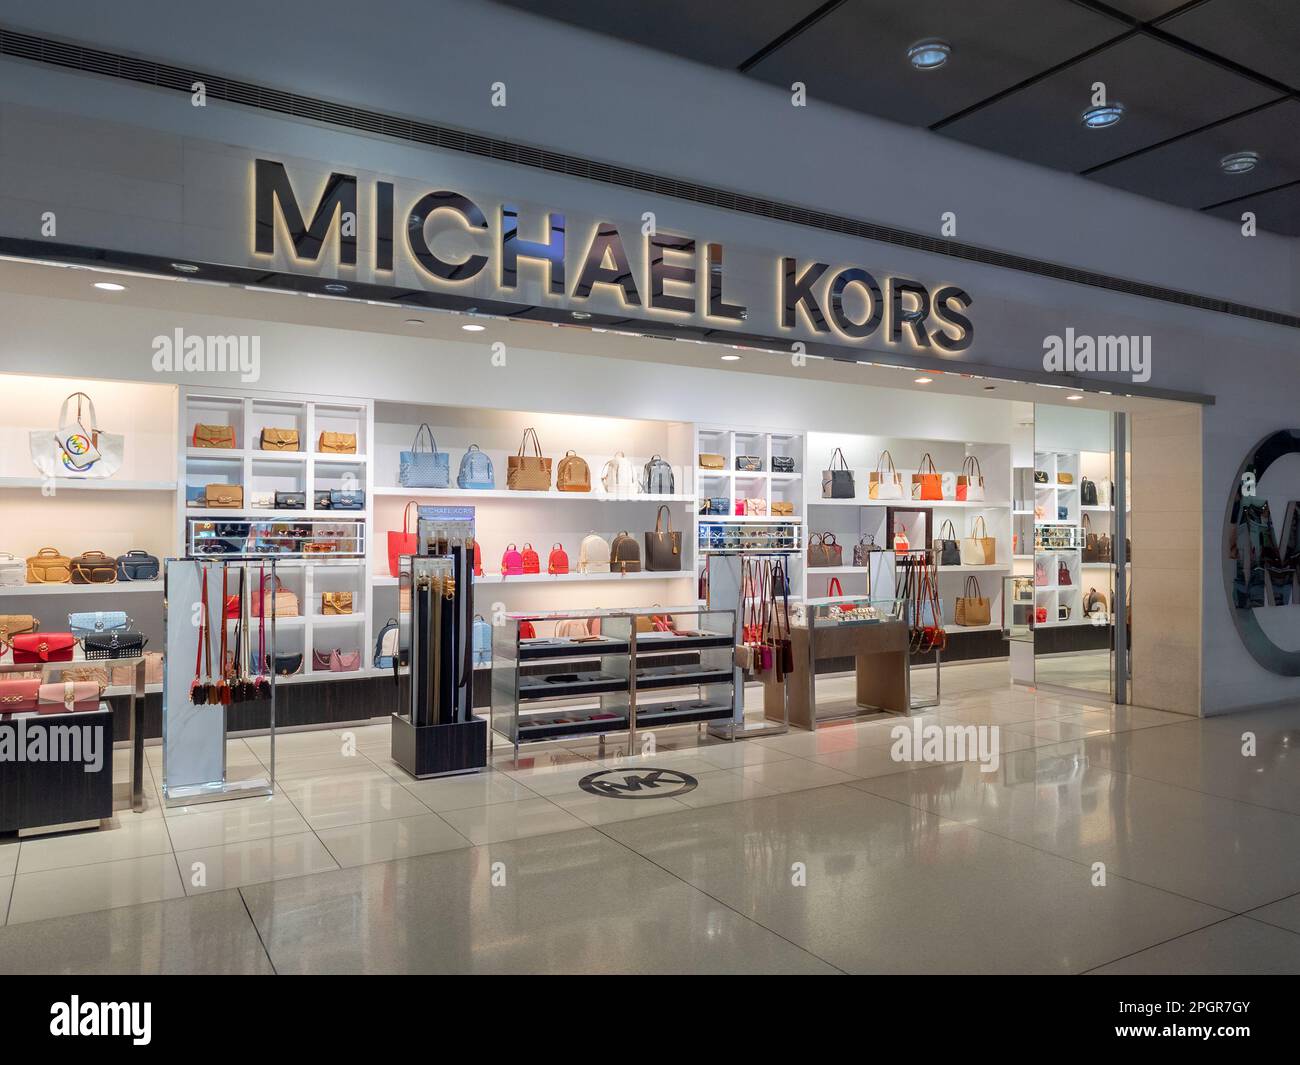 Queens, New York - Feb 6, 2023: Landscape Close-up View of Michael Kors Store inside JFK Airport. Stock Photo